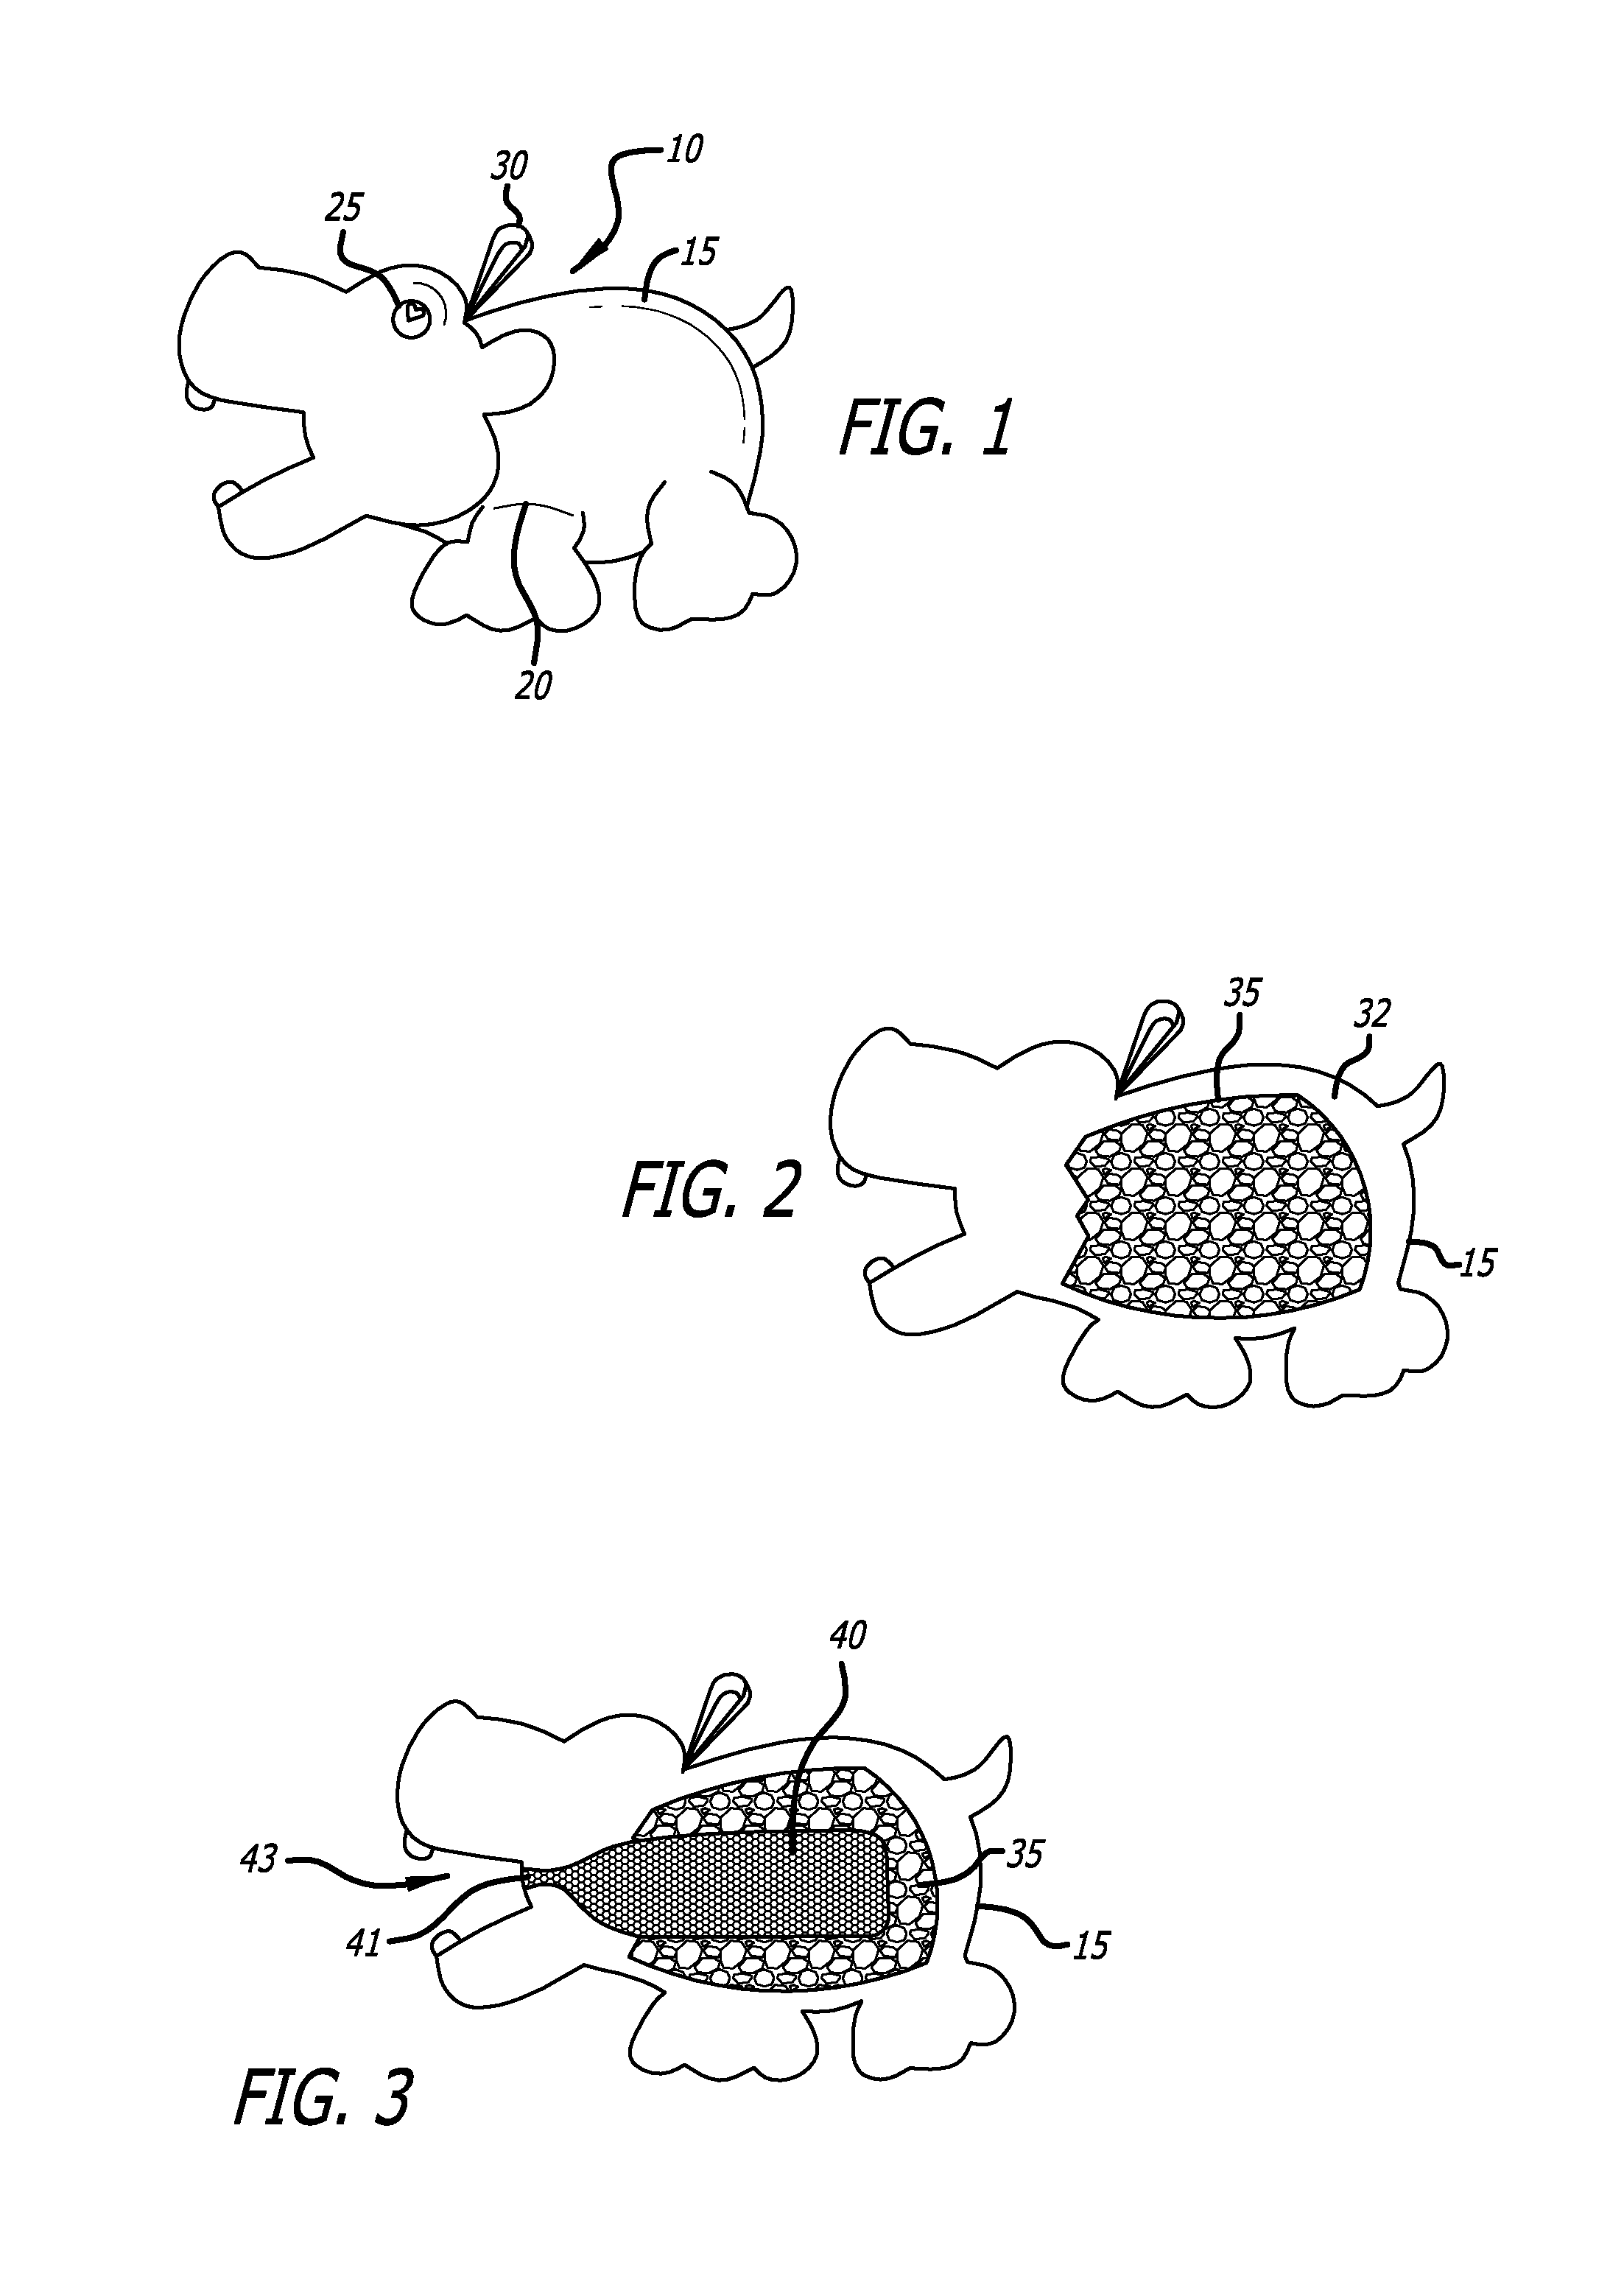 Character-shaped porous mitt for housing and dispensing soap